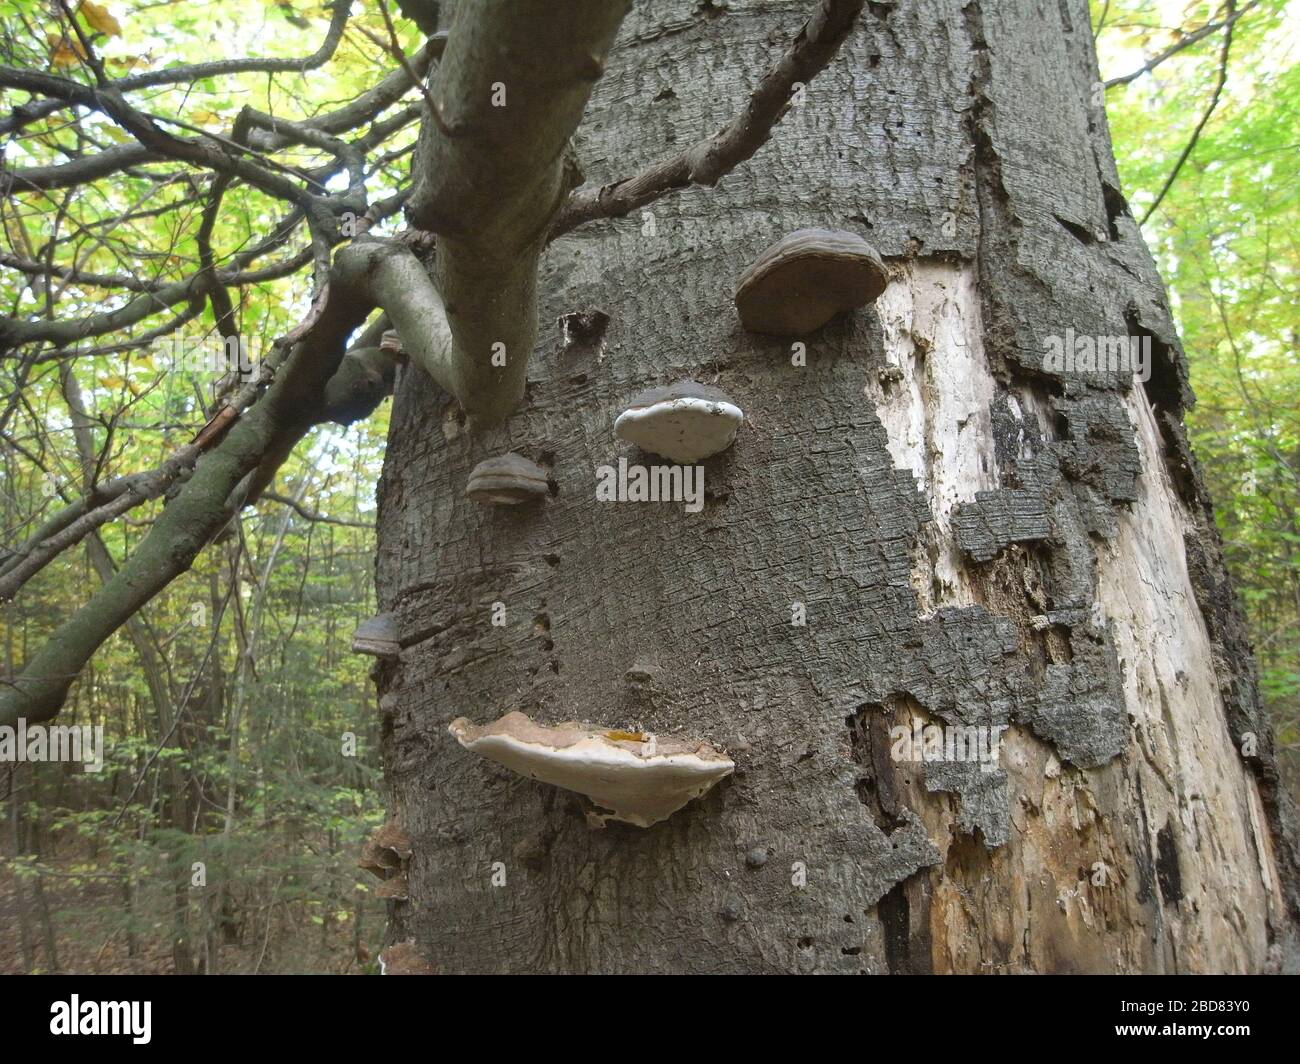 common beech (Fagus sylvatica), with chipped bark and tree fungi, Germany Stock Photo